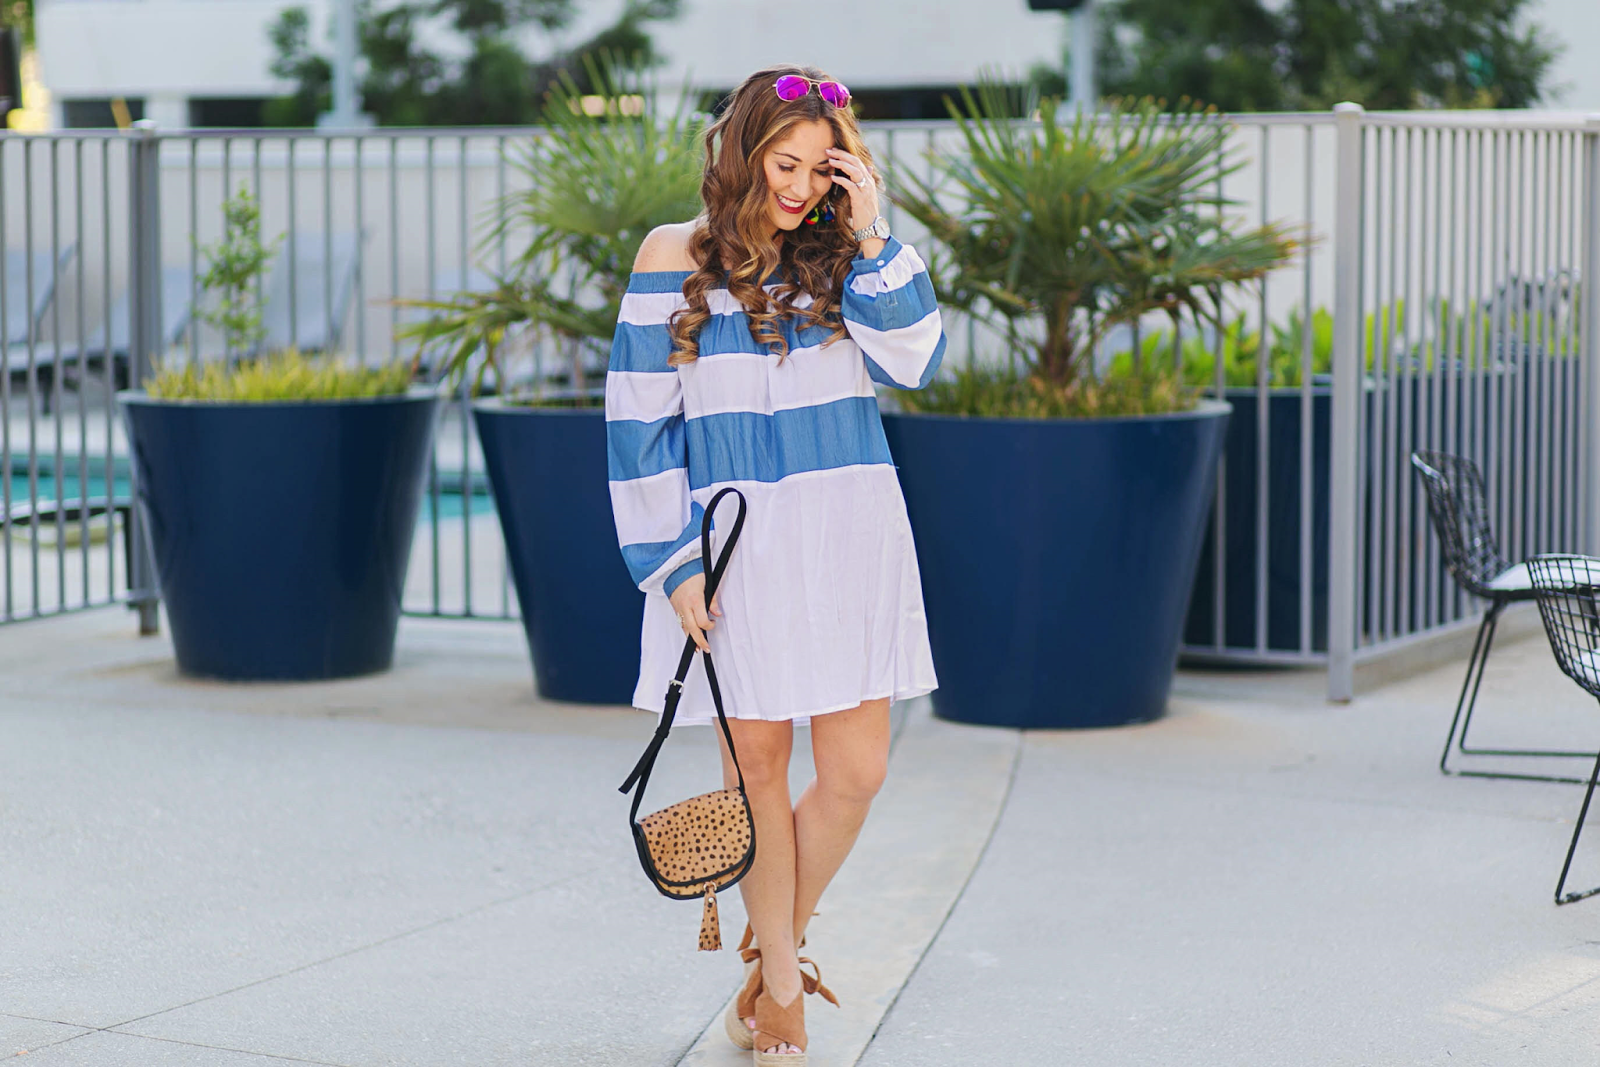 Trend Spin Linkup - Favorite Sunglasses by fashion blogger Laura form Walking in Memphis in High Heels